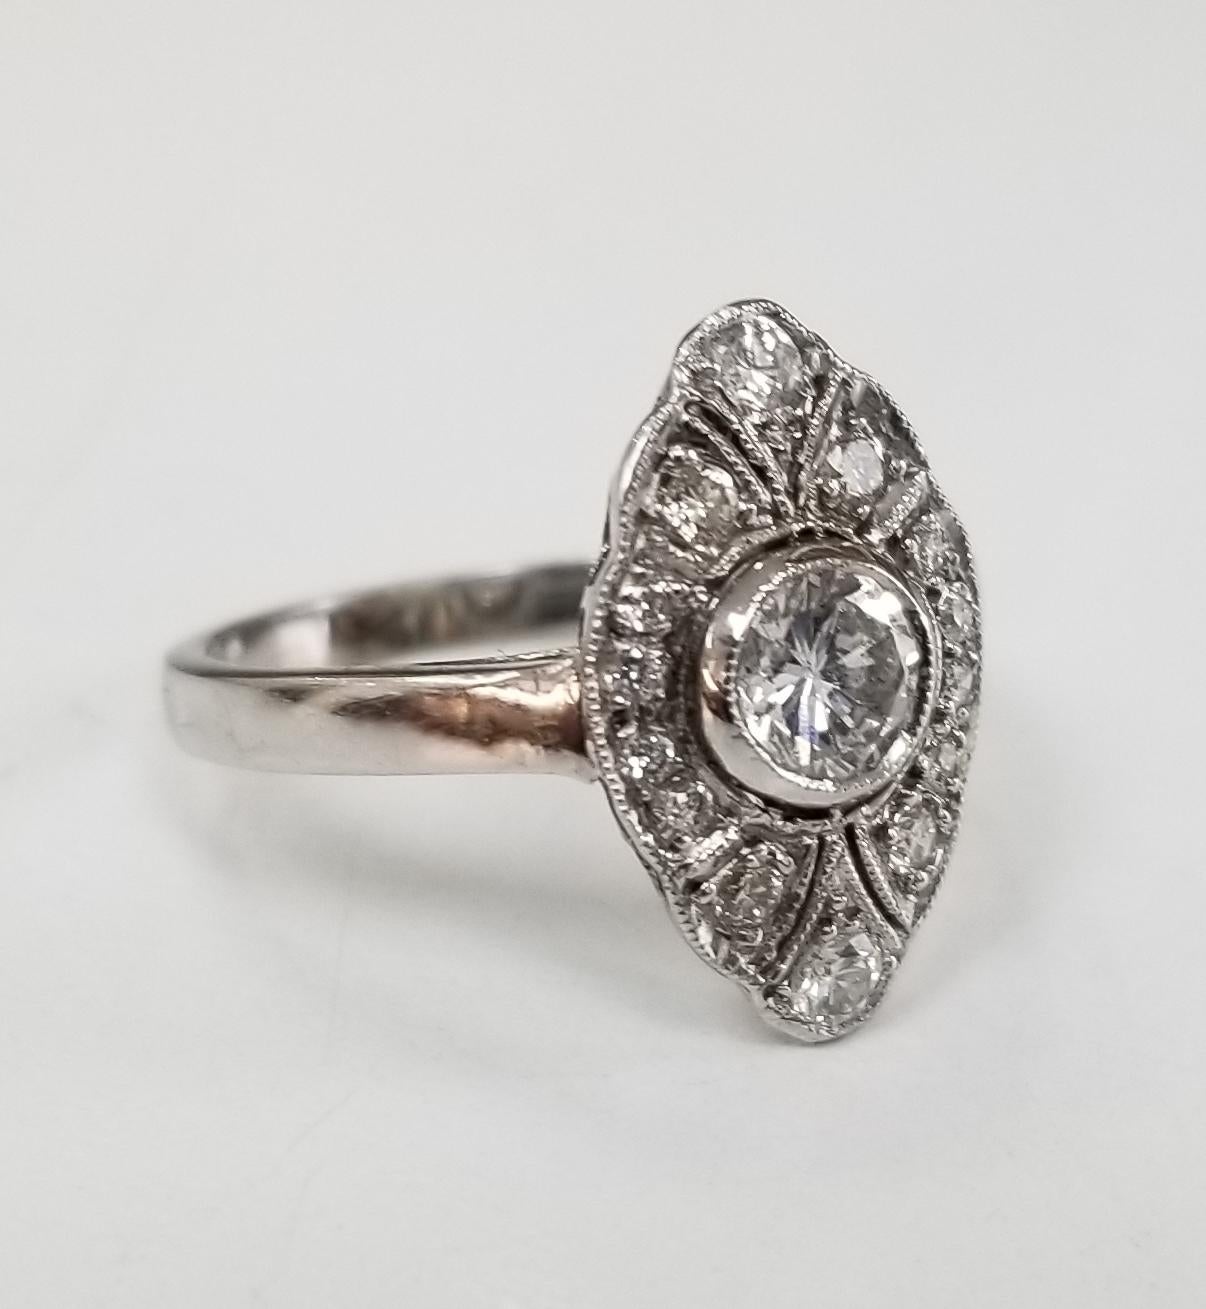 14 karat white gold diamond wedding vintage looking ring, containing 1 brilliant cut diamond weighing .32pts. and 14 full cut diamonds weighing .26tps.  This ring is a size 5.5 but we will size to fit for free.